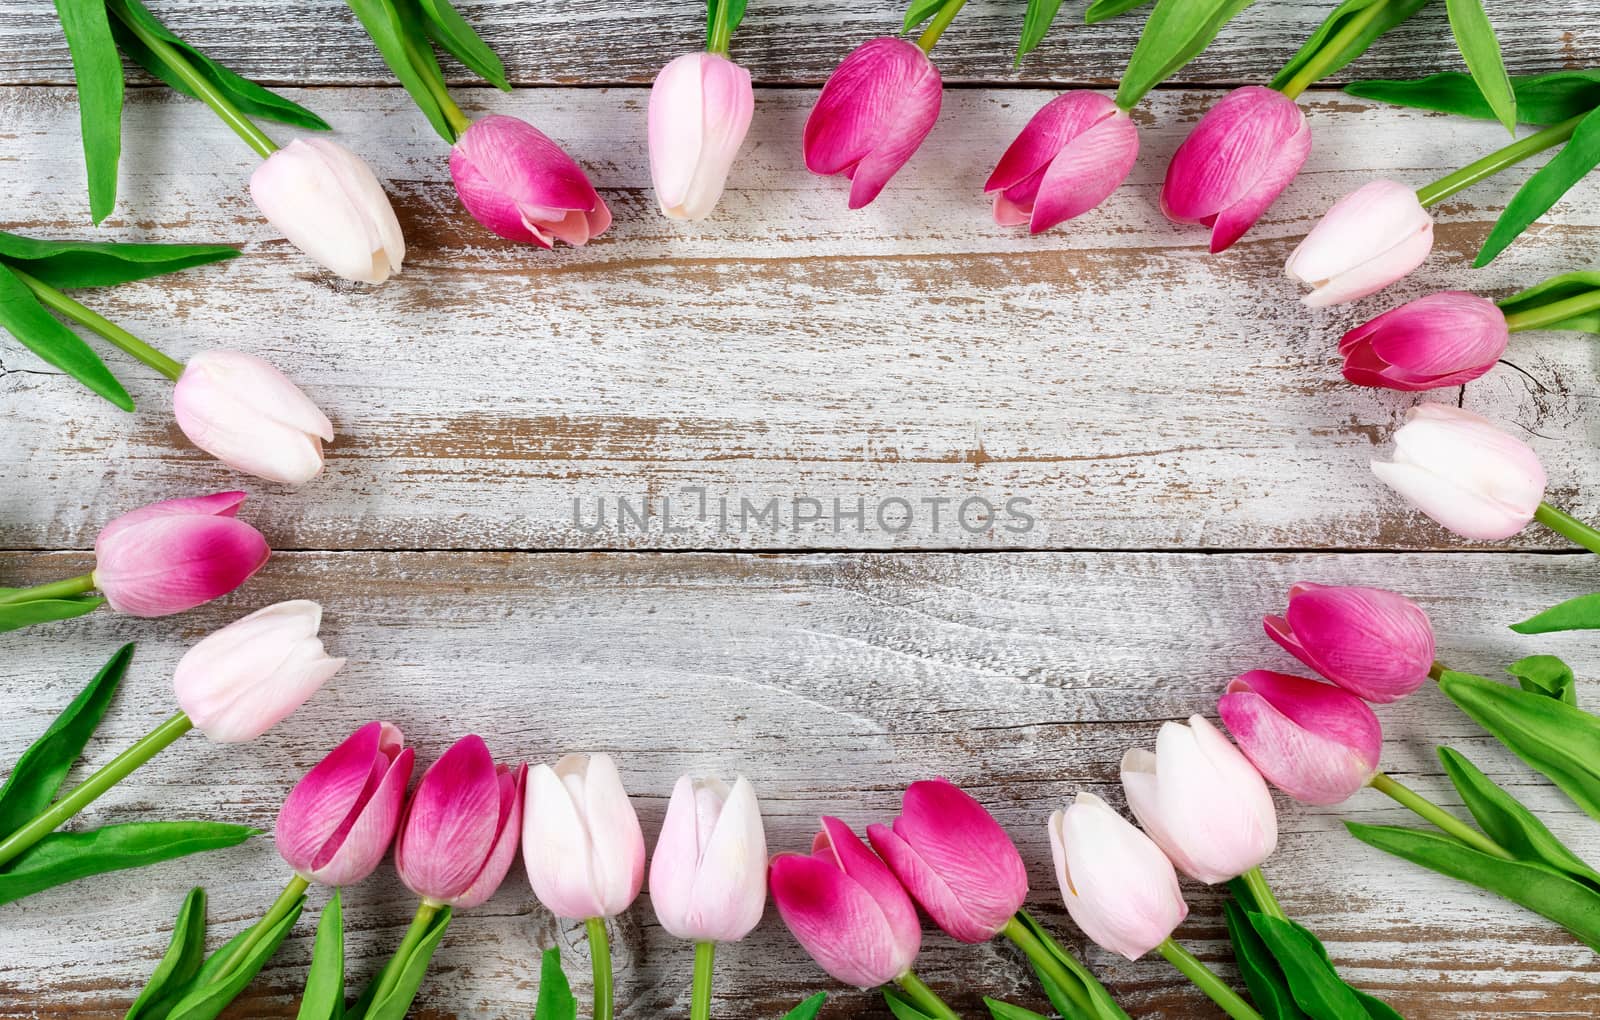 Circle of Tulips on white rustic wooden background  by tab1962